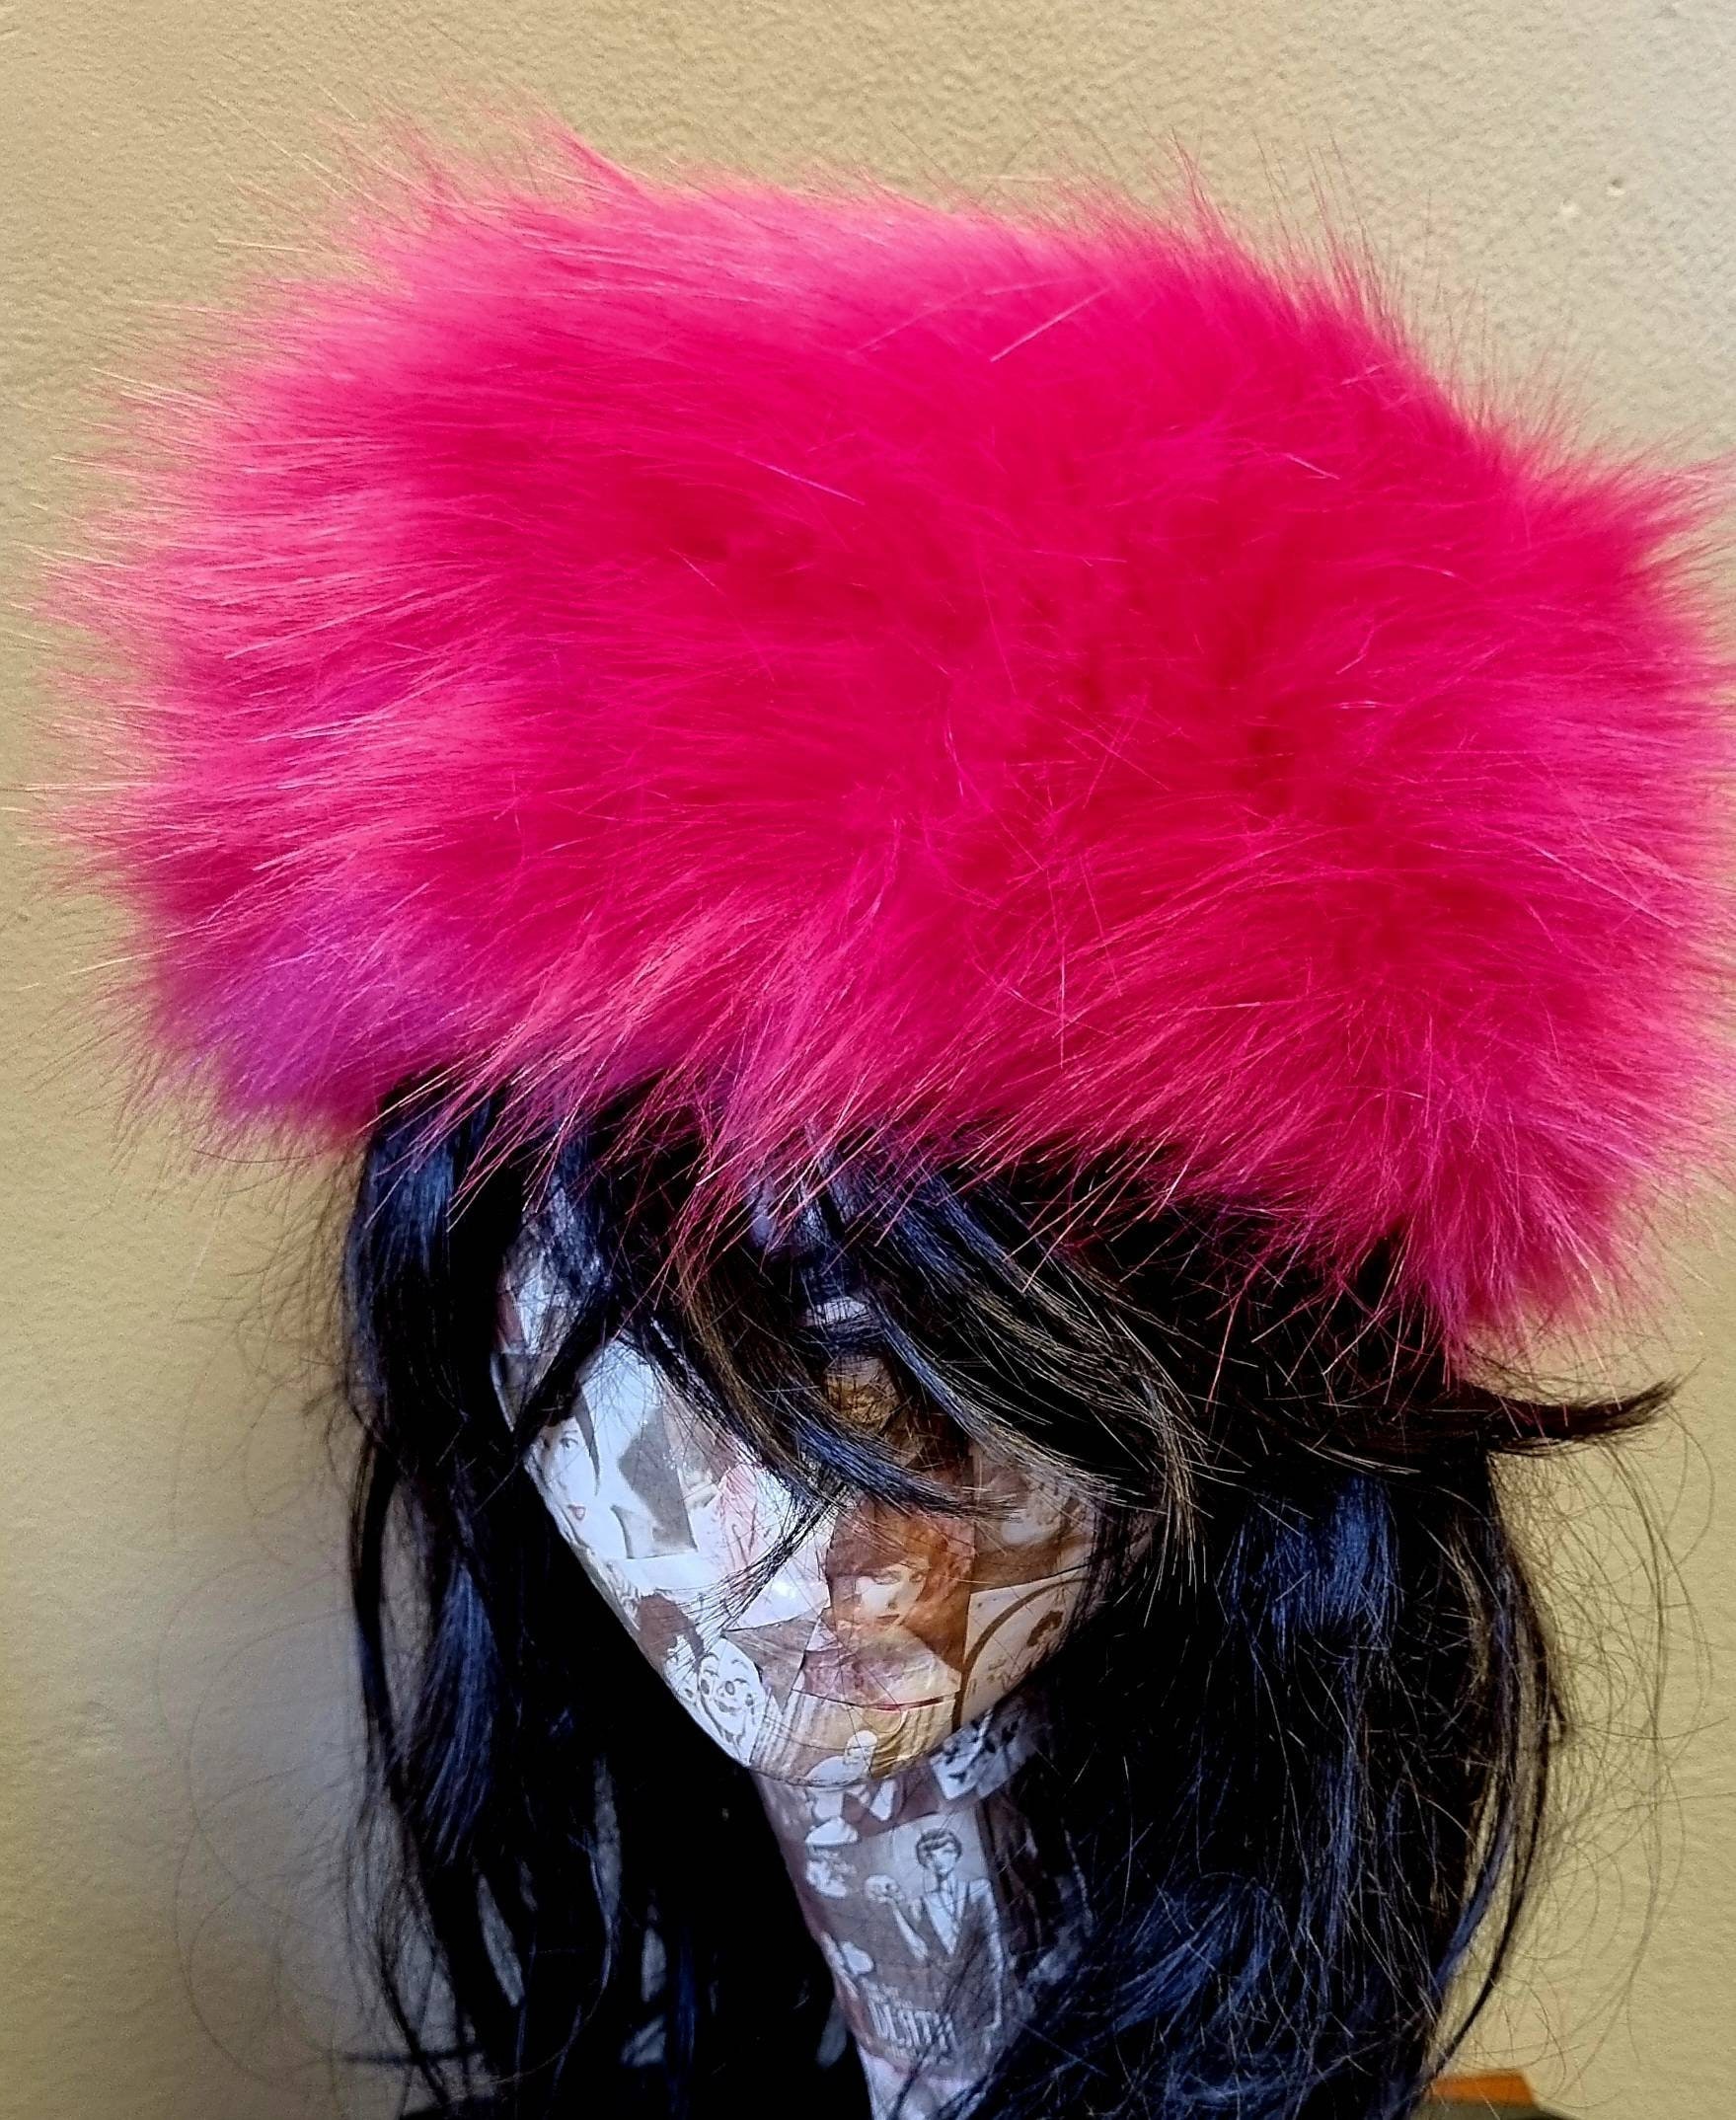 OffMyHeadHats Baby Pink Fluffy Faux Fur Headband-Neckwarmer-Earwarmer-Head Wrap-Fur Head Wrap-Pink Fur- Pink Fur Headband